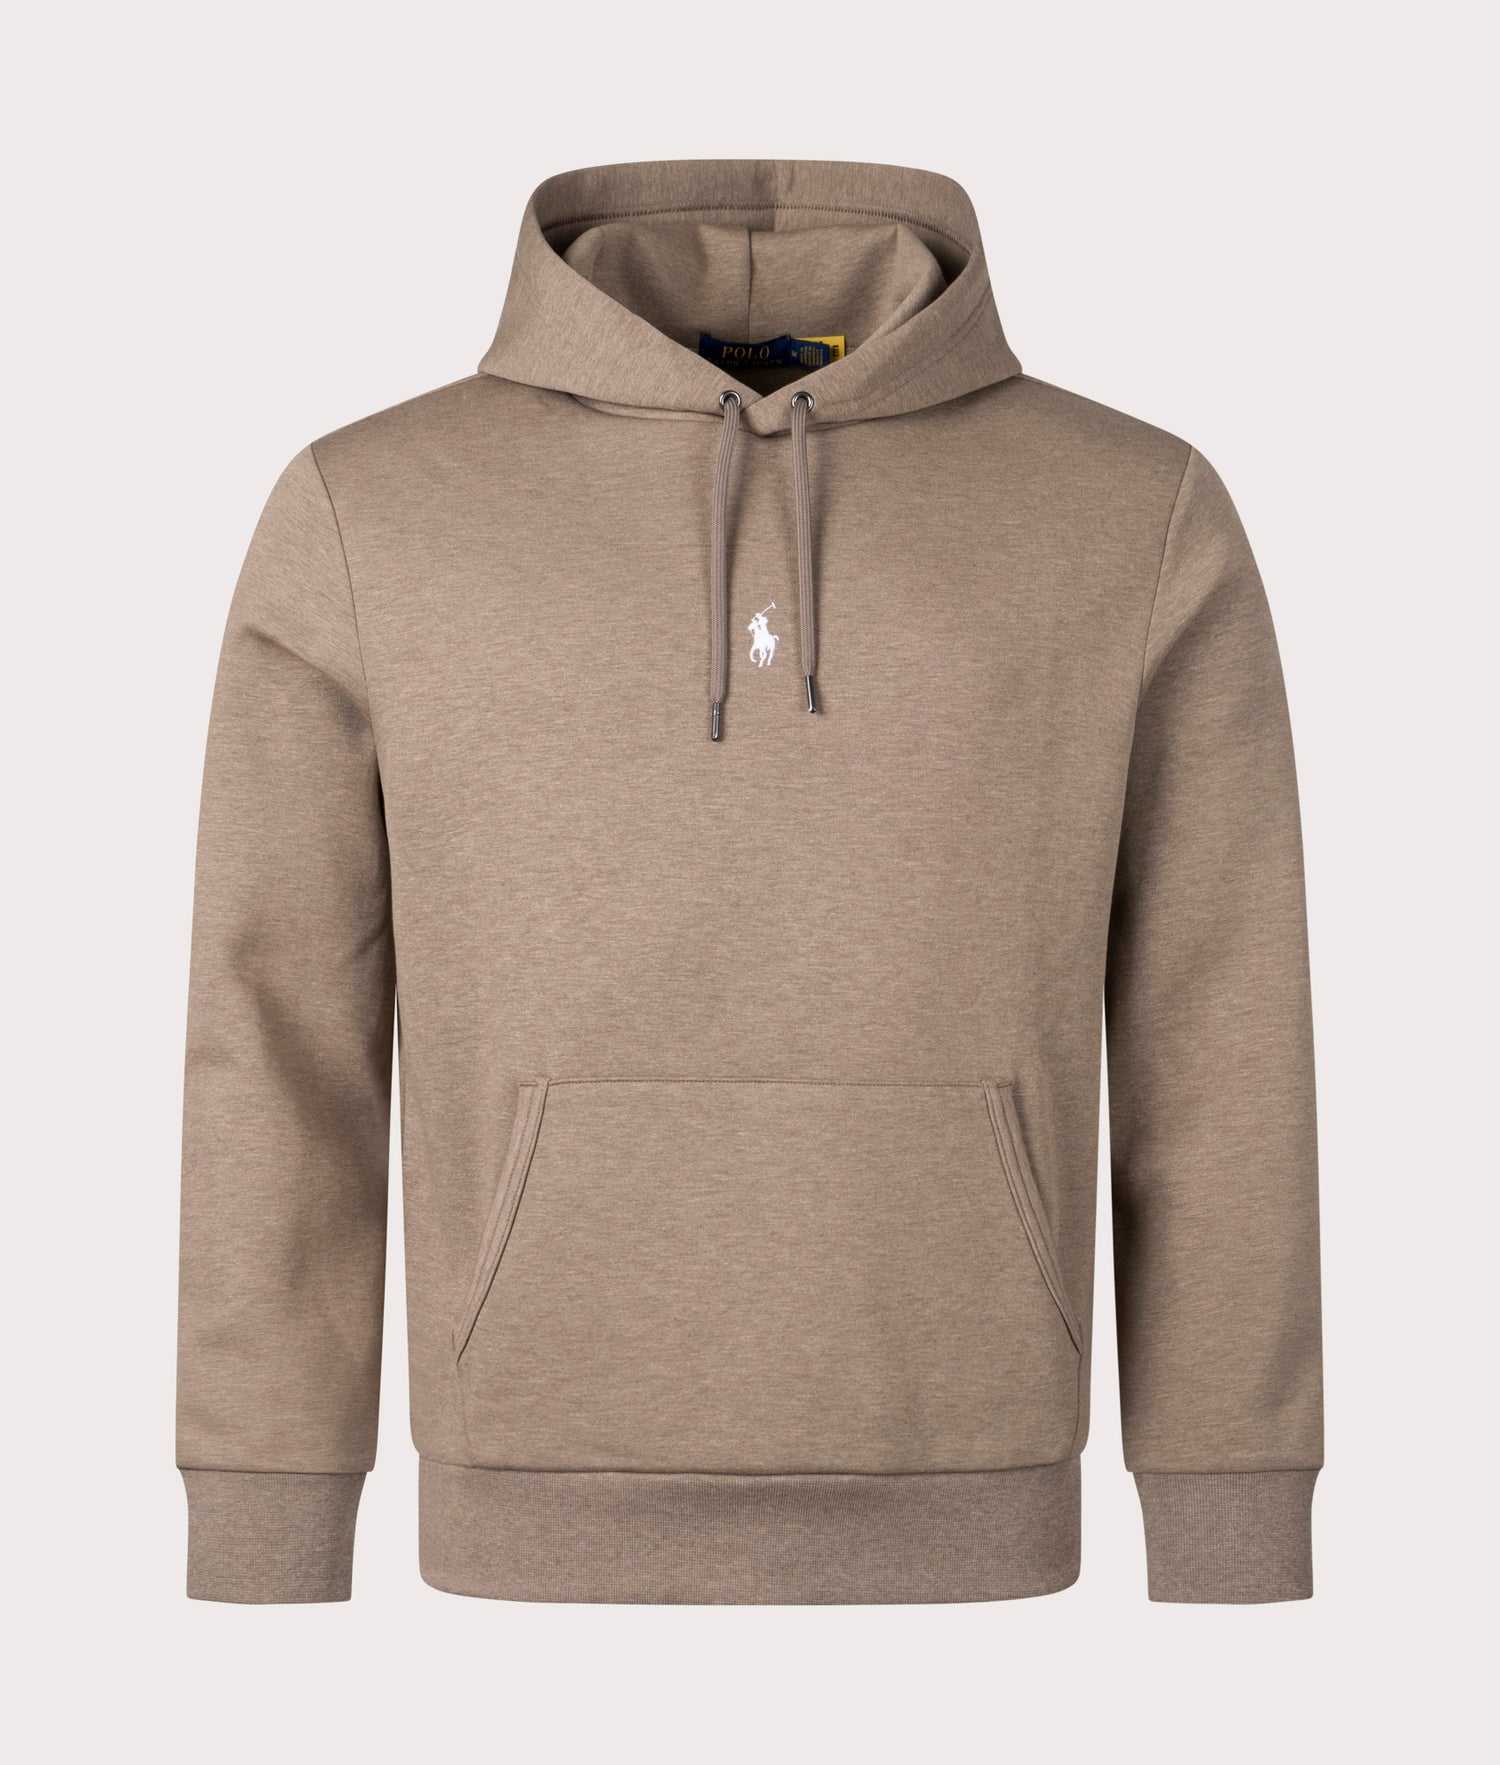 Double Knit Central Logo Hoodie in 031 DK Taupe Heather | Polo 